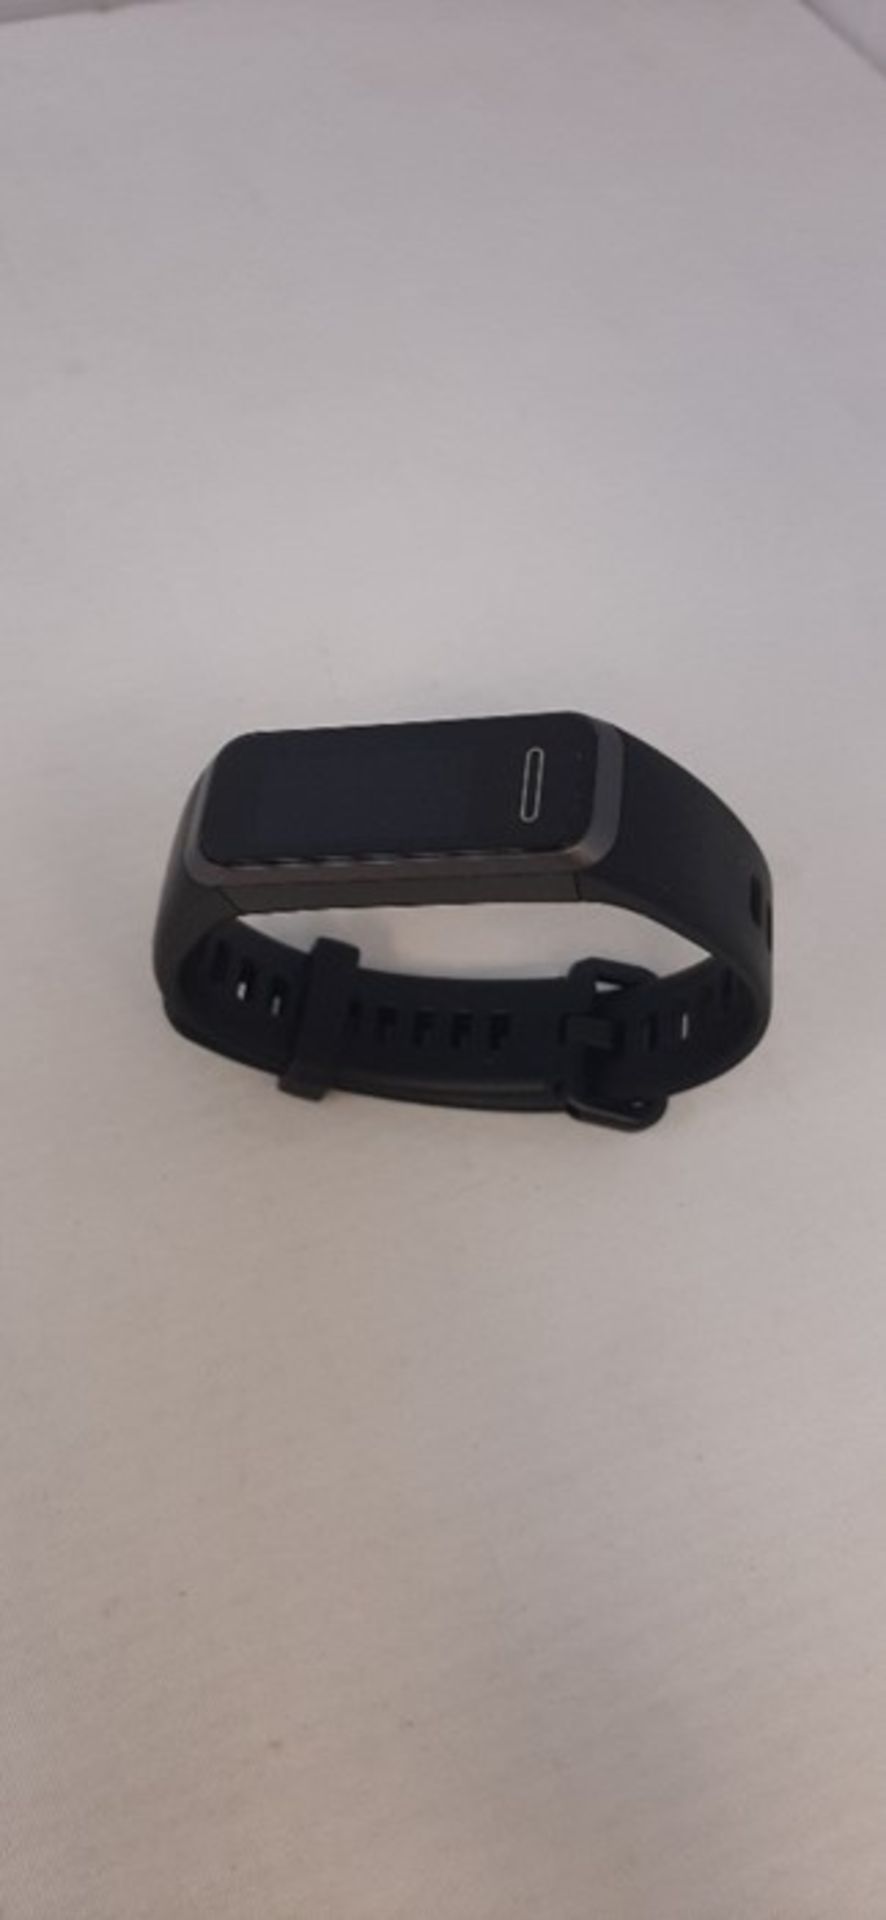 HUAWEI Band 4 Smart Band, Fitness Activities Tracker with 0.96" Color Screen, 24/7 Con - Image 3 of 3